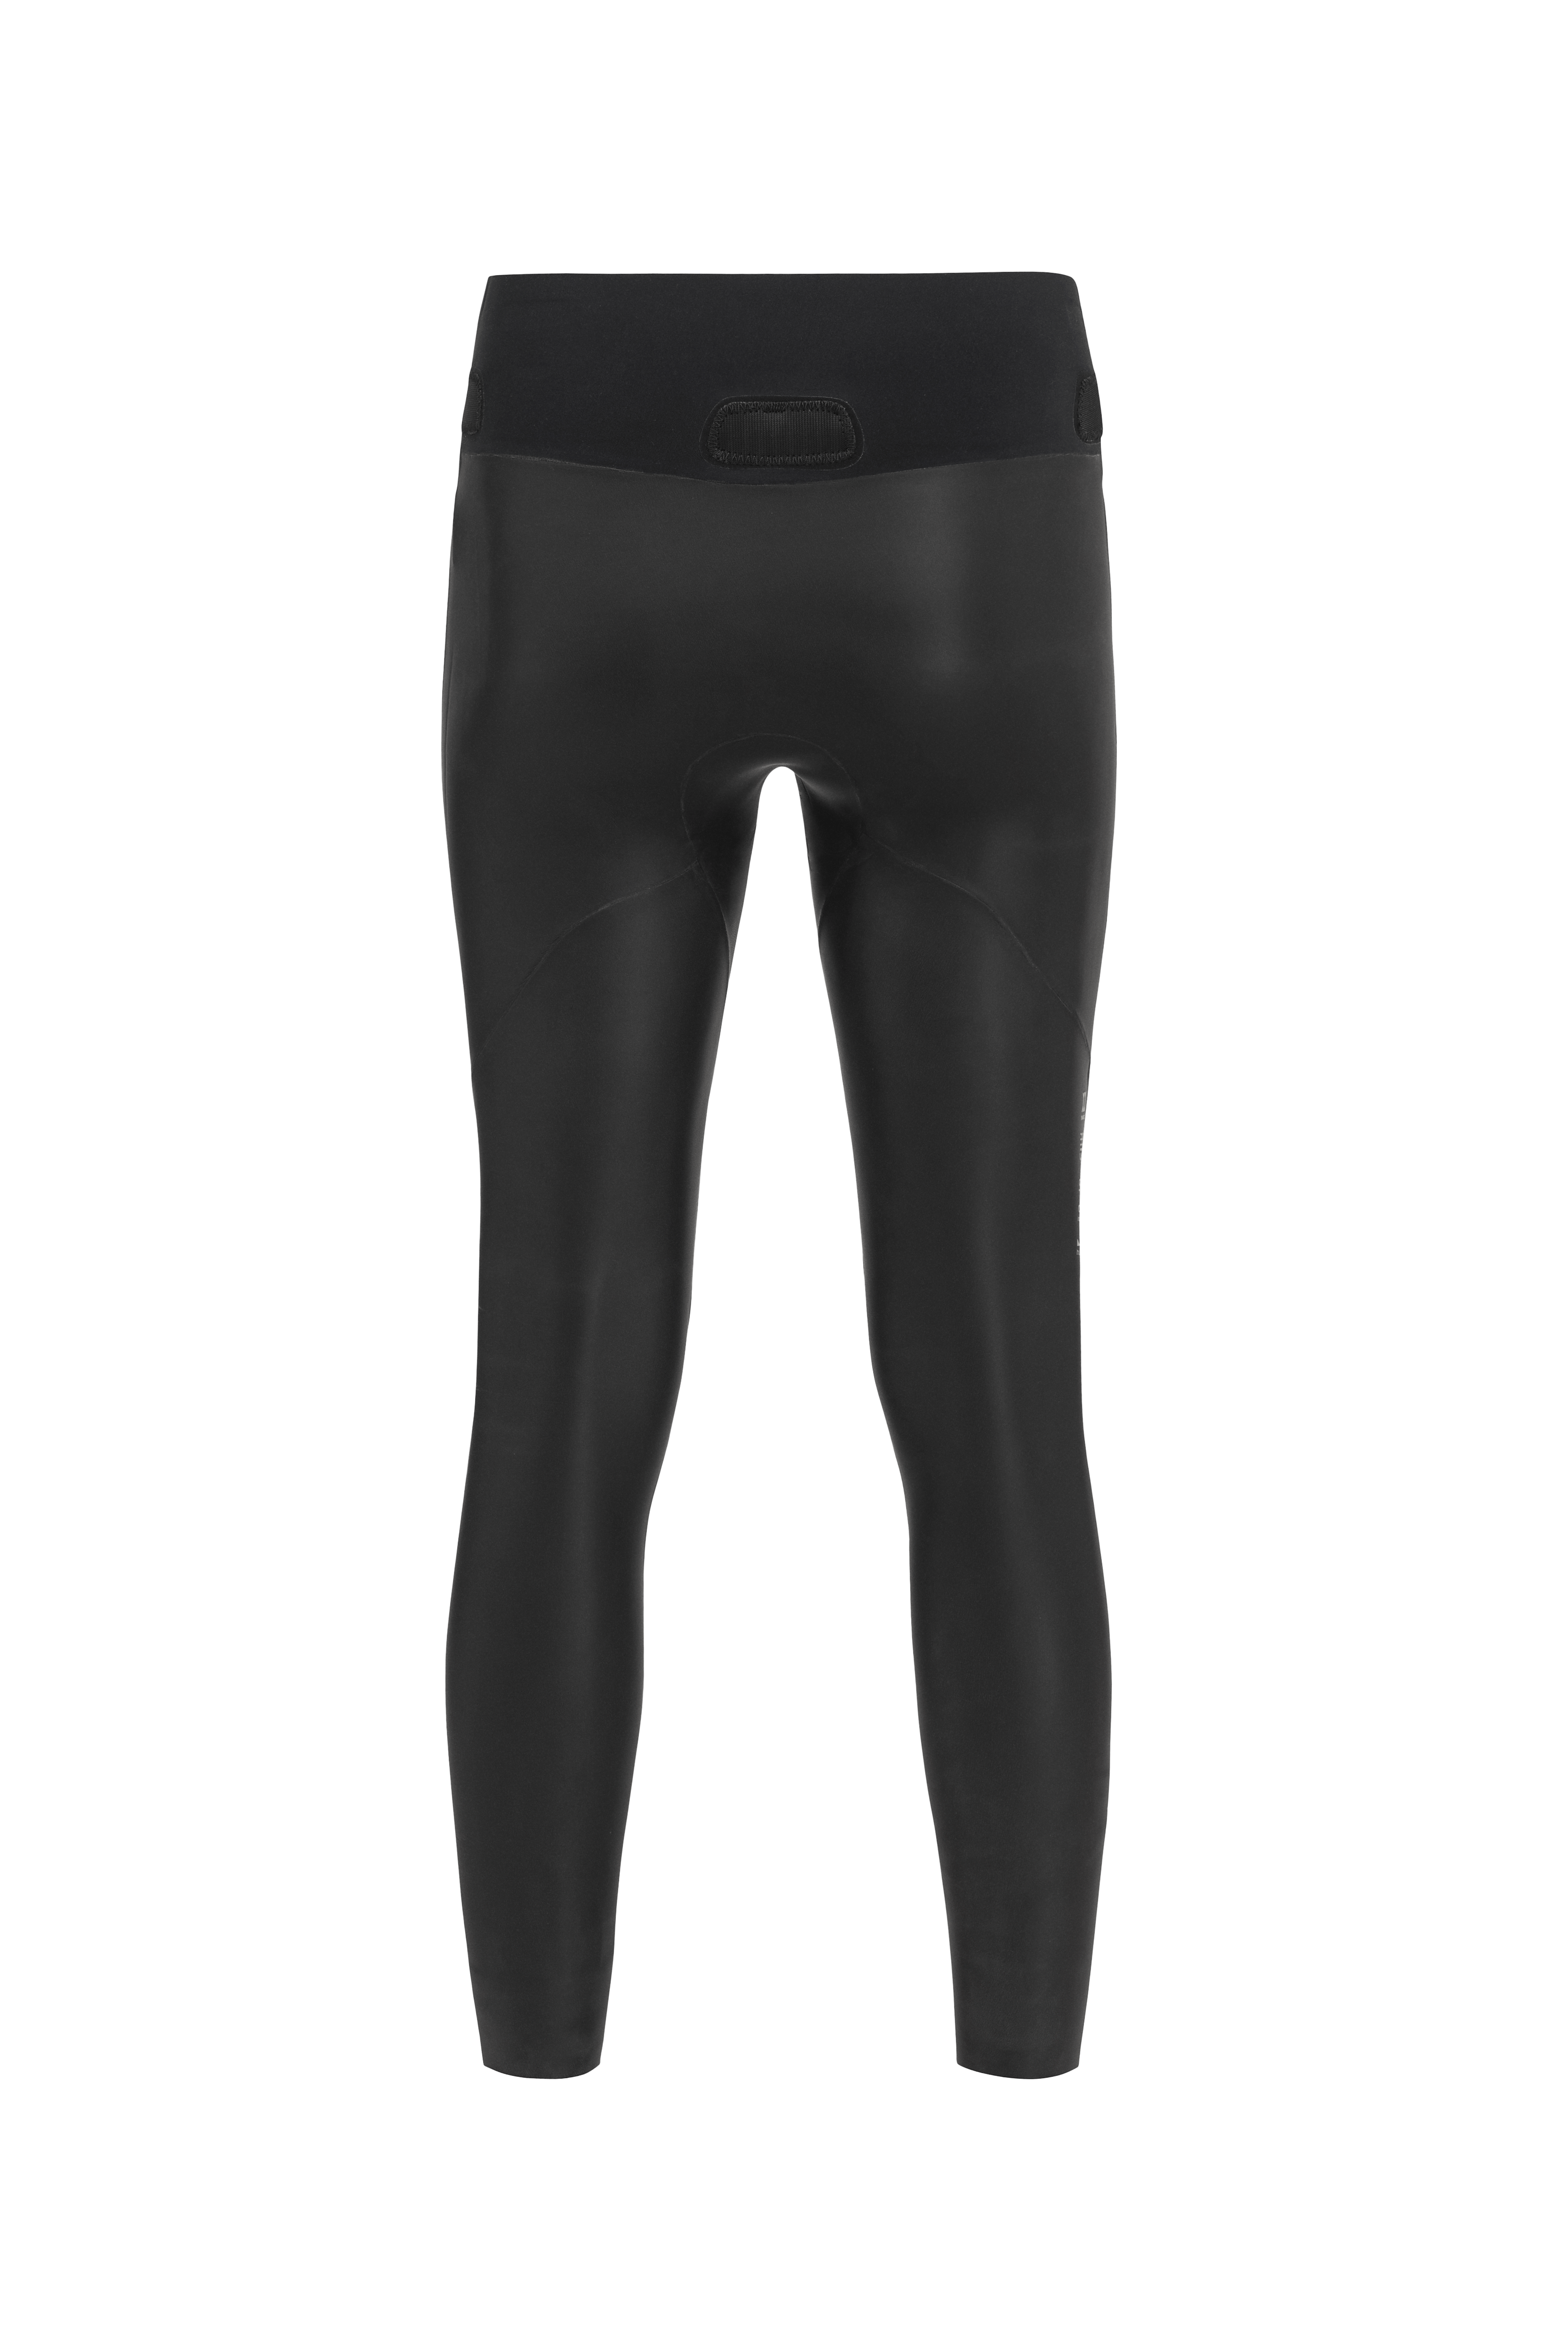 orca Ocean Swimming Openwater RS1 Bottom Mens Wetsuit